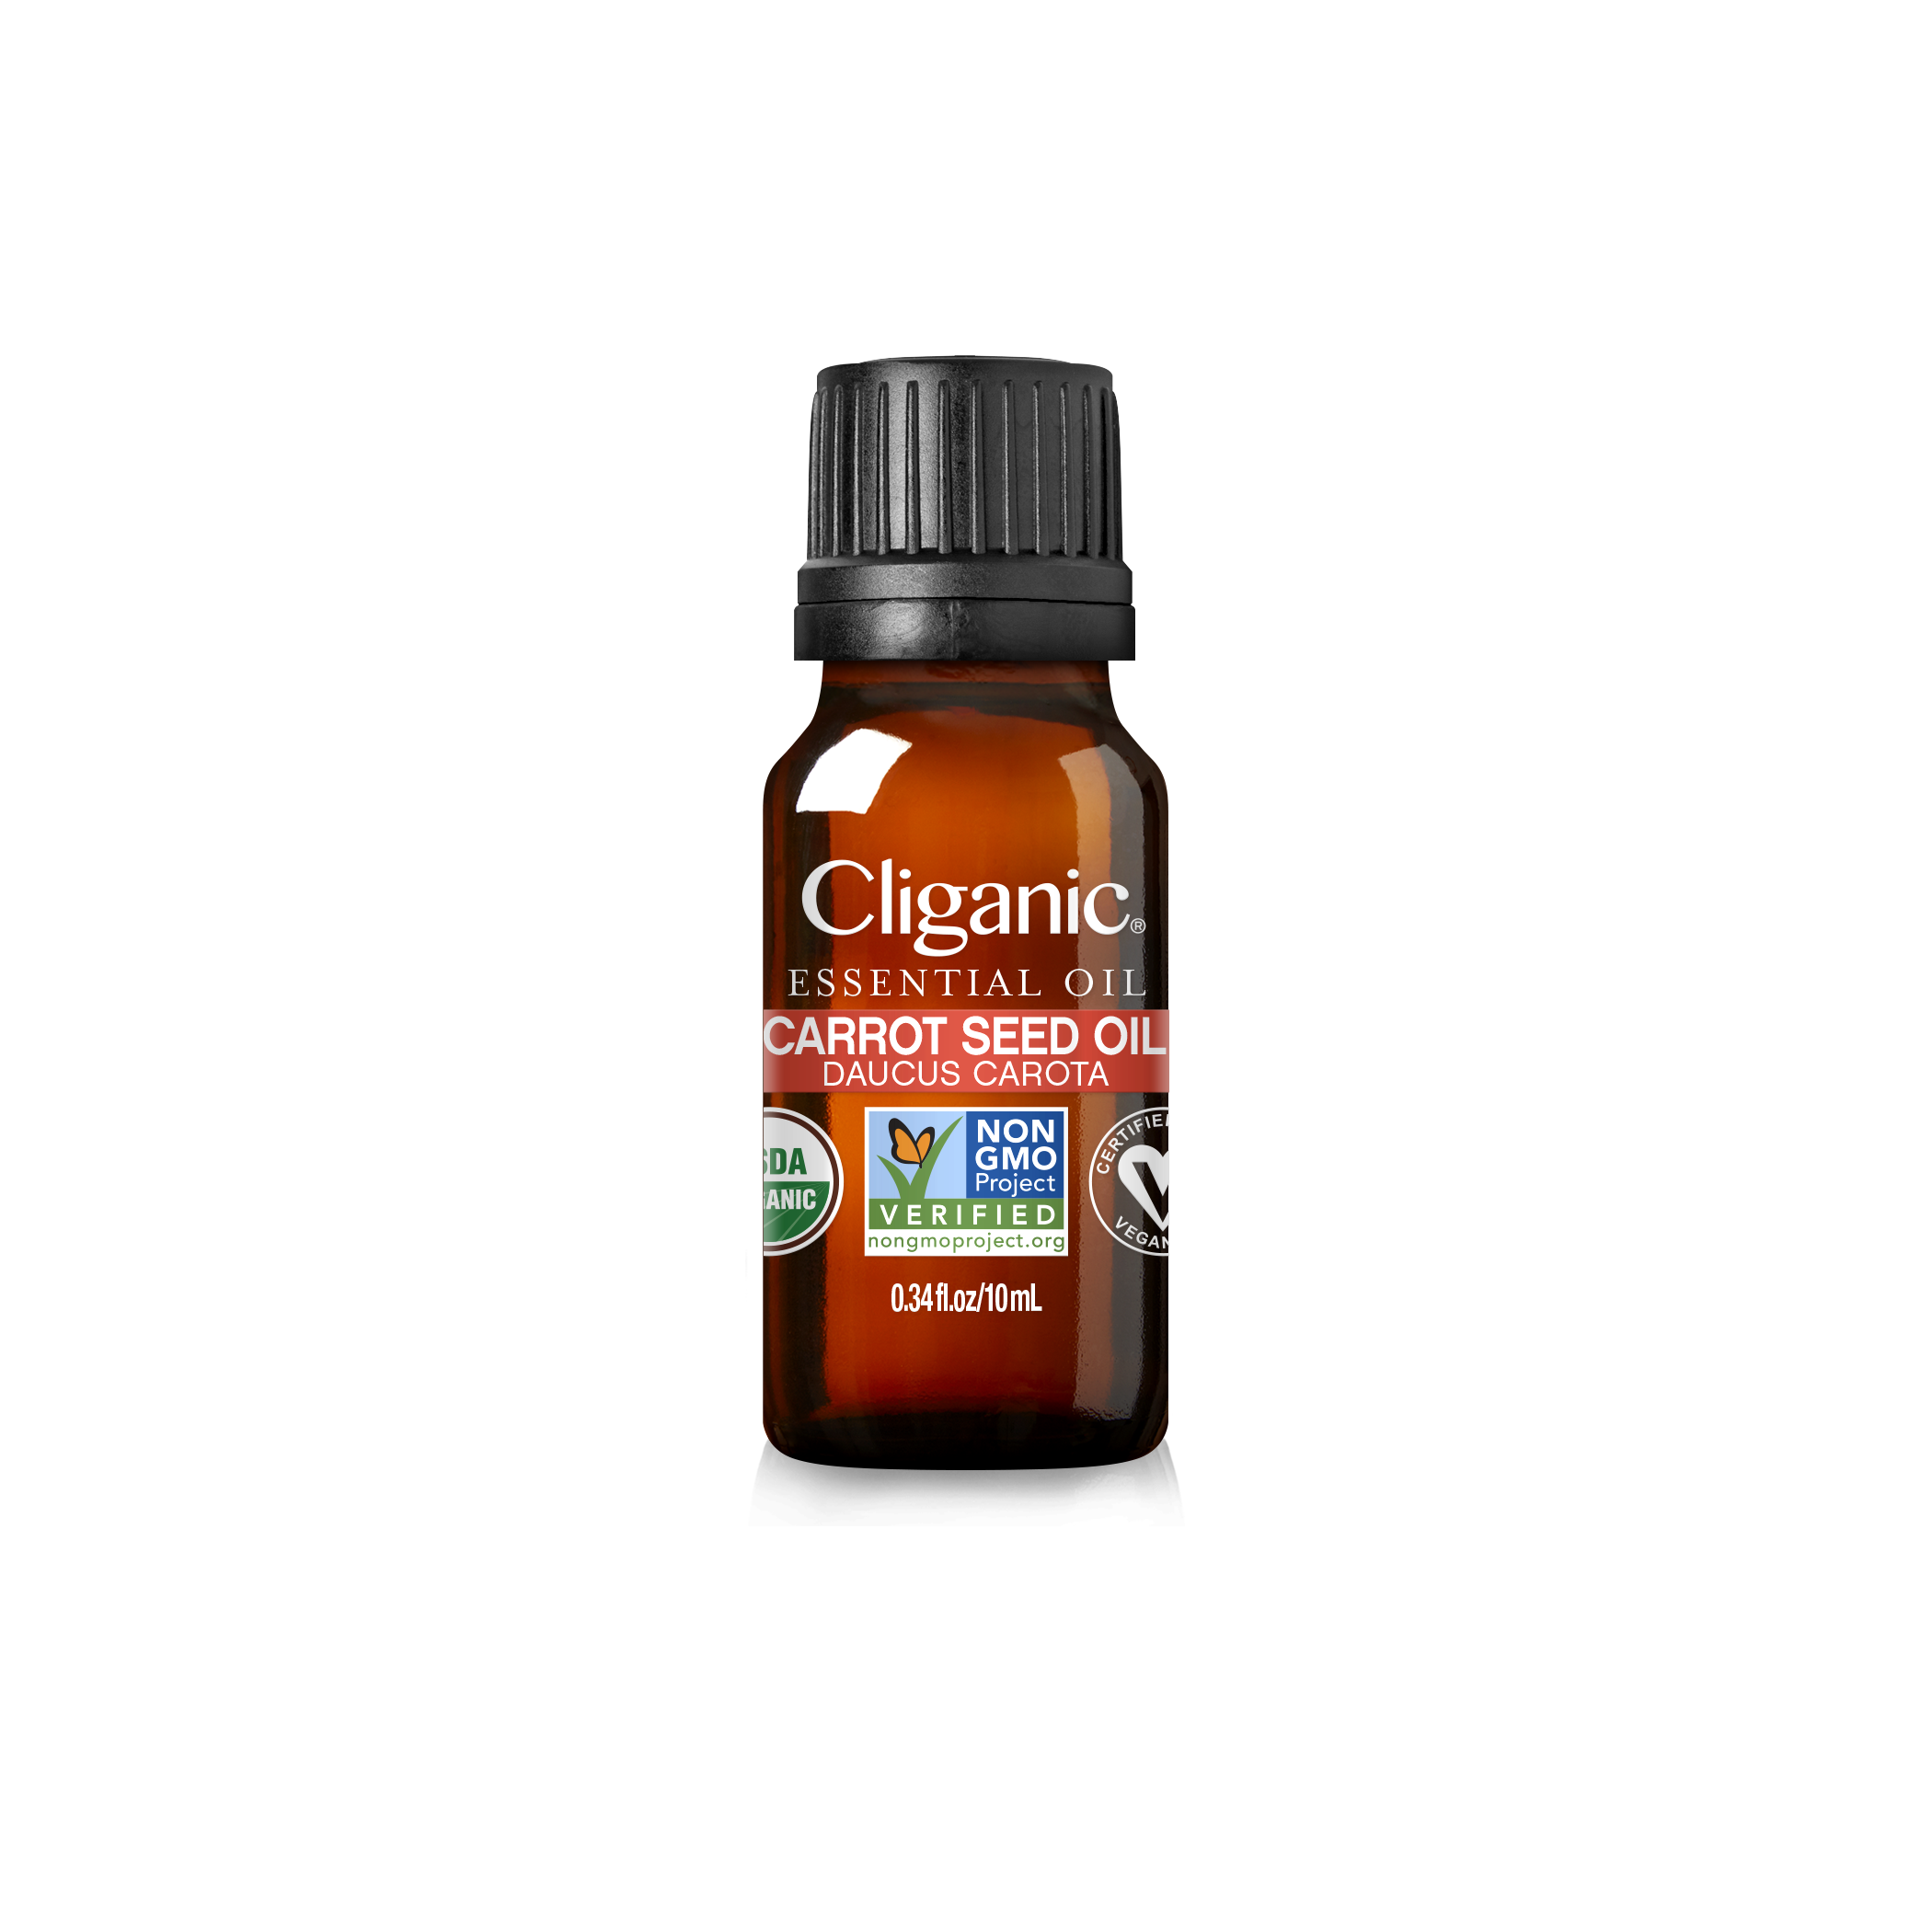 Cliganic wholesale products